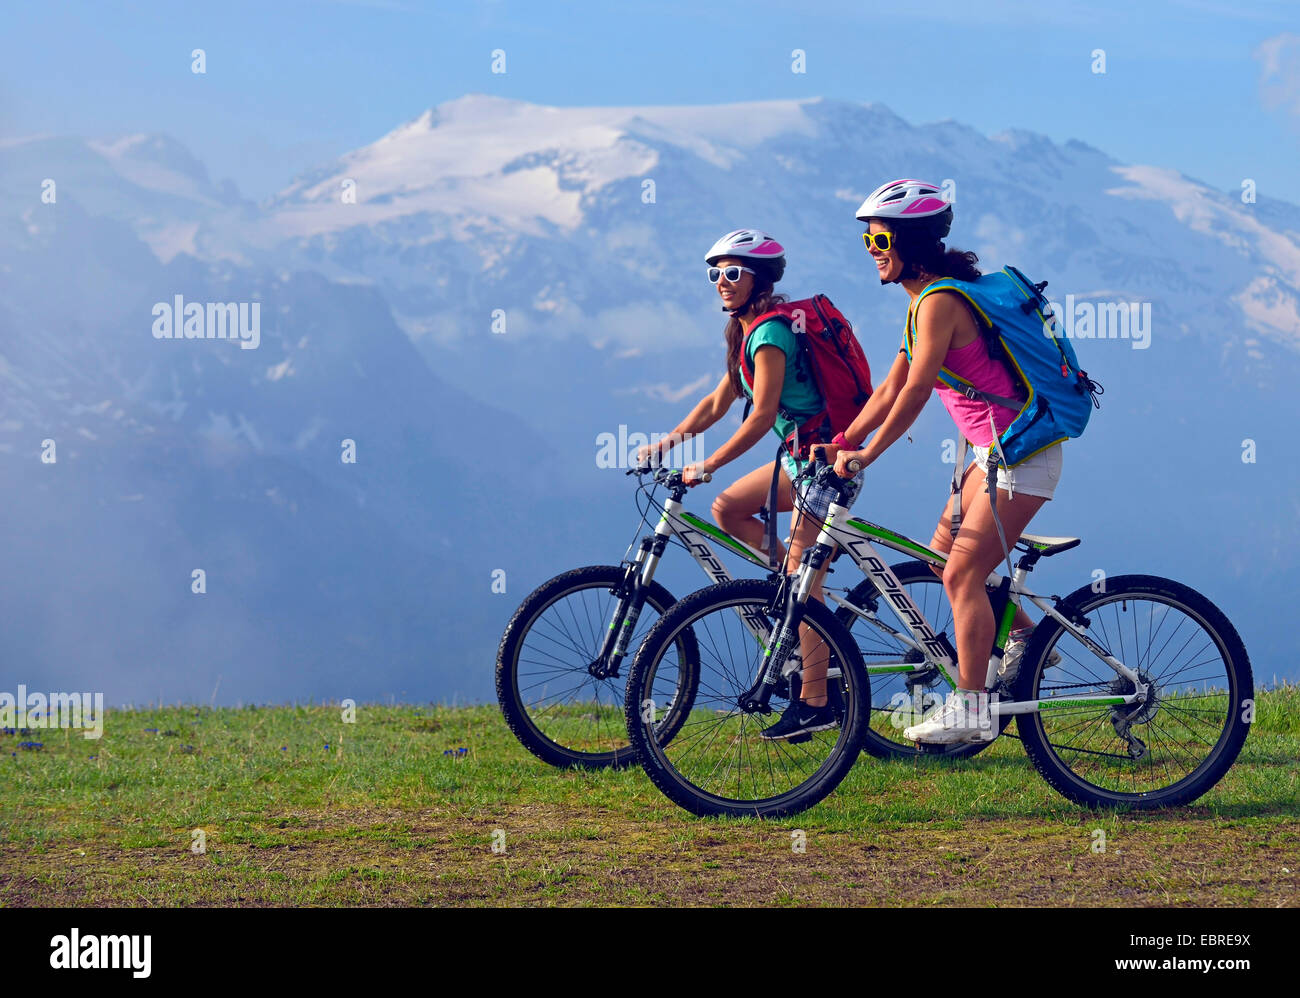 two female mountain bikers in front of mountain scenery, France, Savoie, Vanoise National Park, Champagny Stock Photo